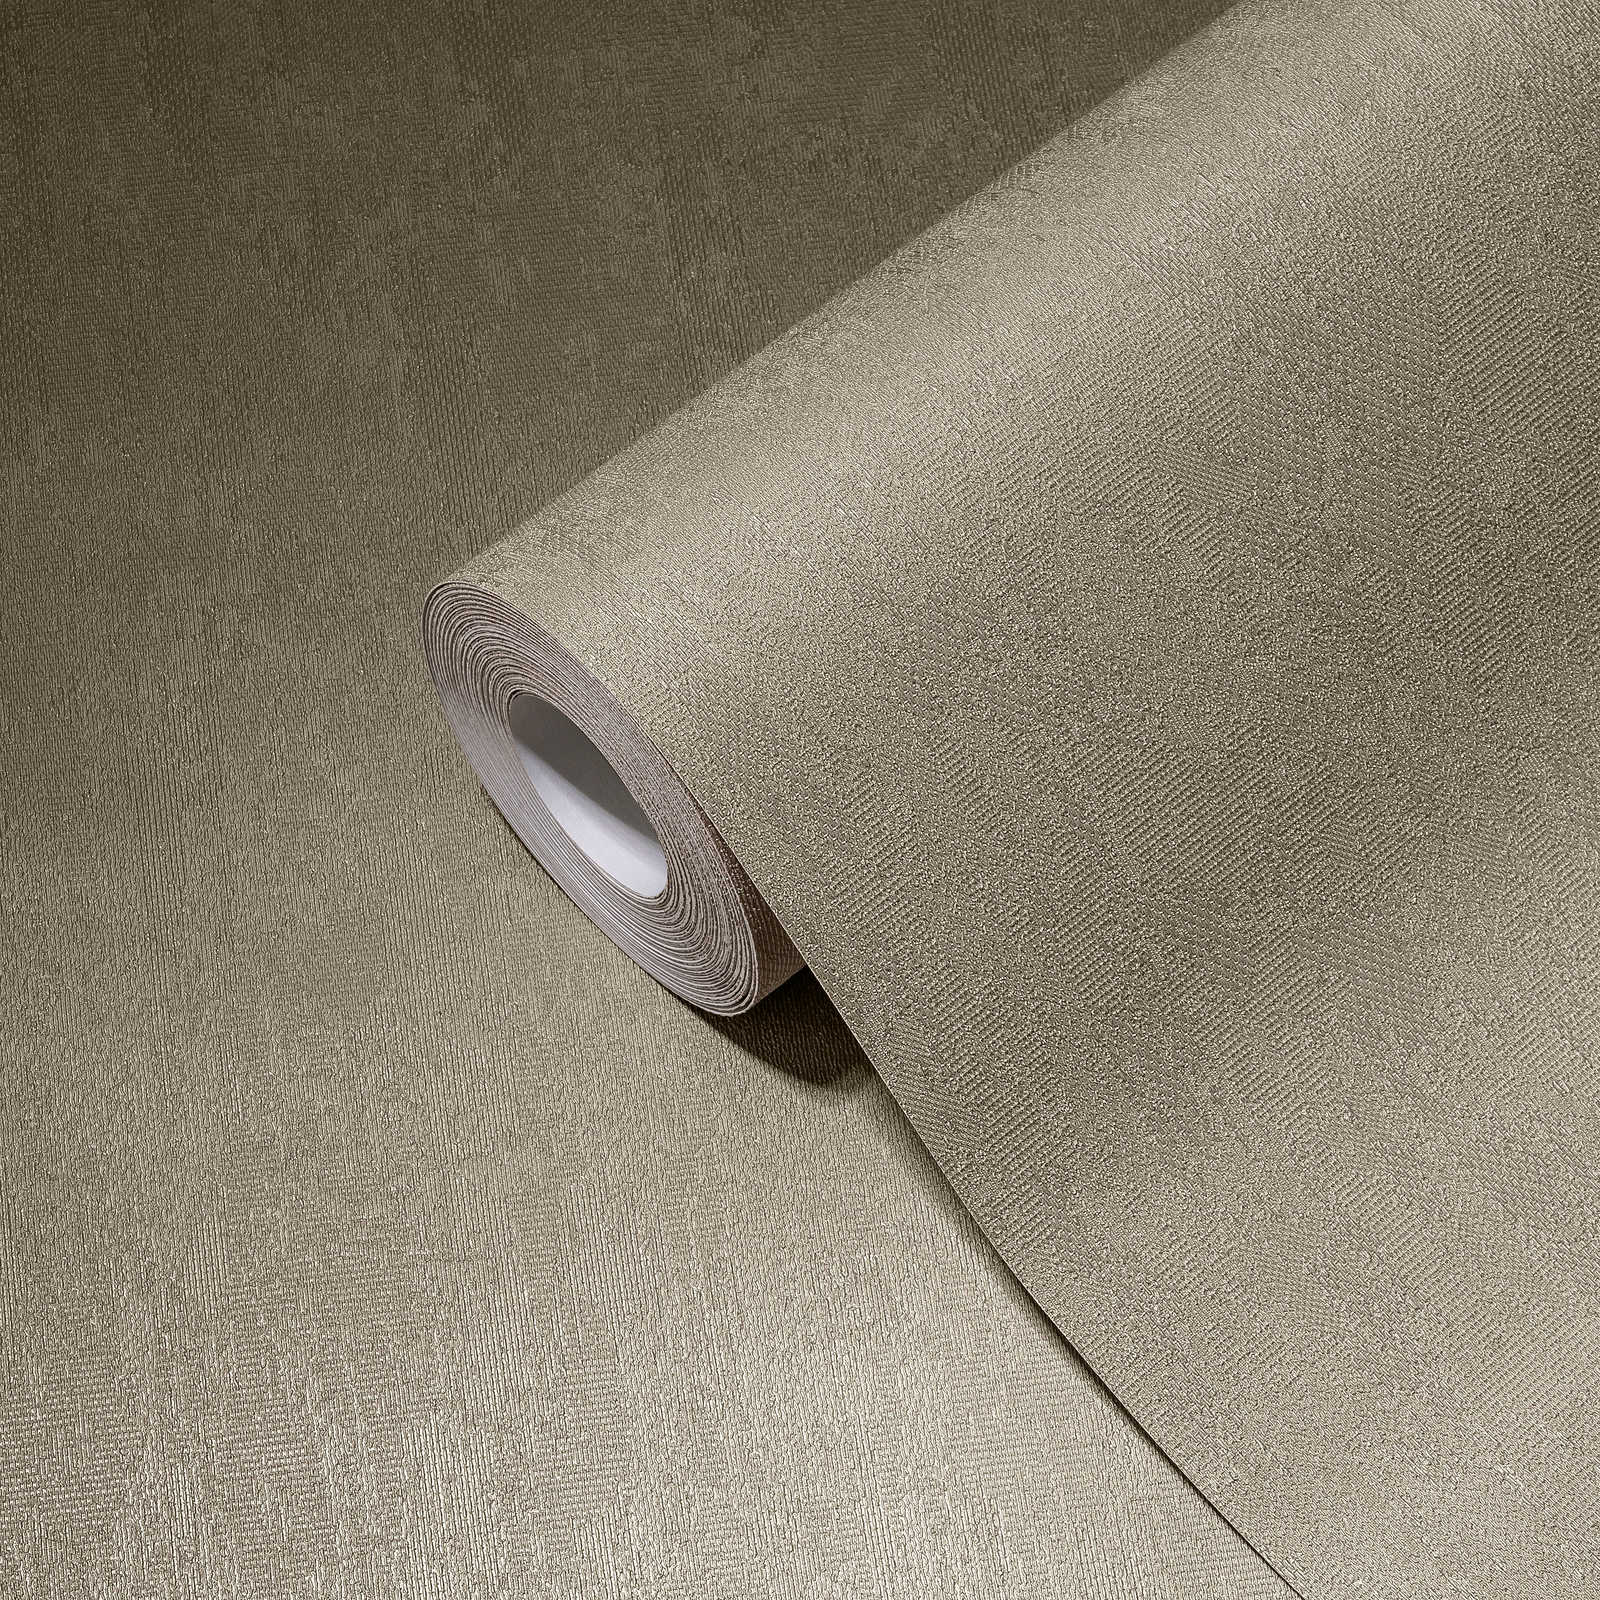             Neutral plain wallpaper grey-beige with textured surface
        